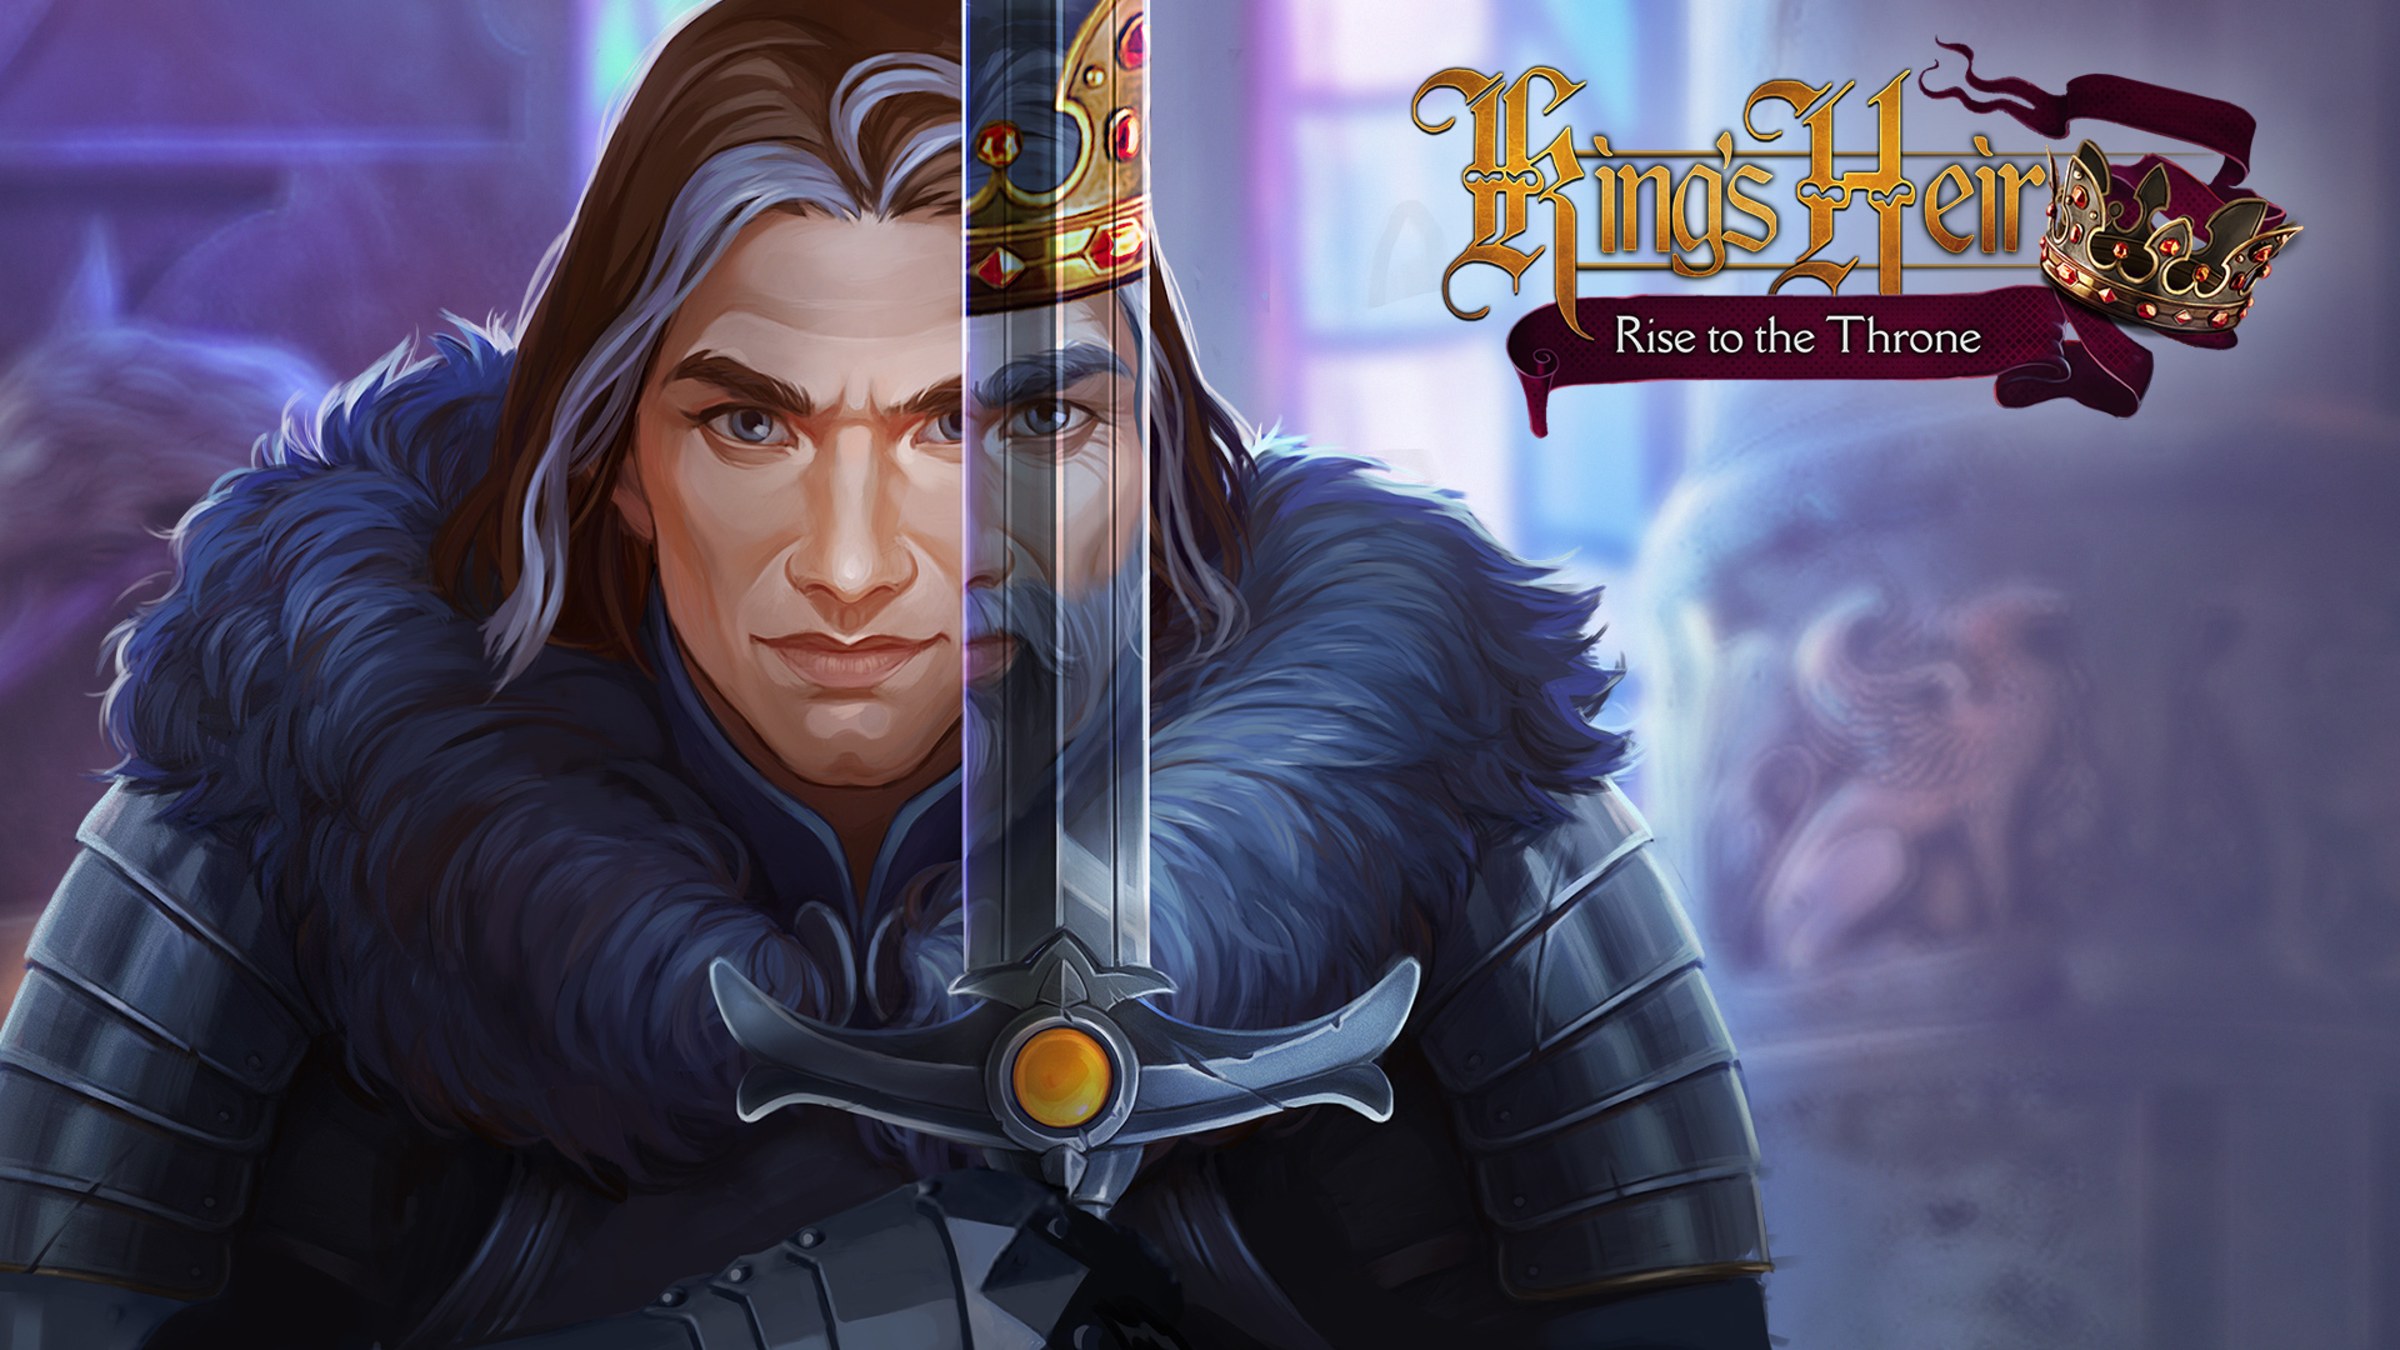 King'S Heir: Rise To The Throne For Nintendo Switch - Nintendo Official Site